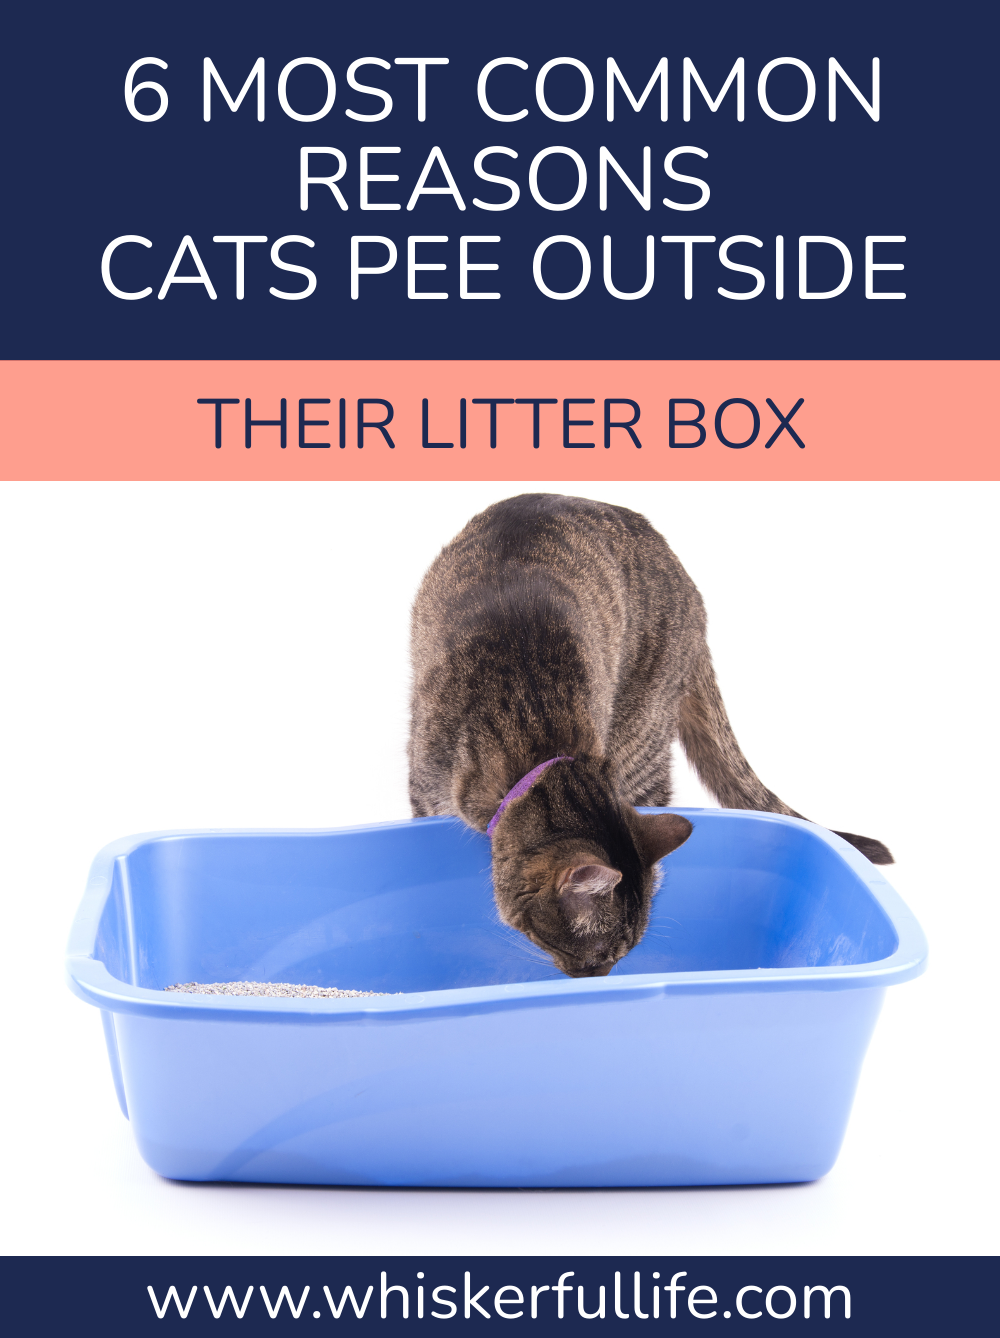 6 Most Common Reasons Cats Pee Outside their Litter Box